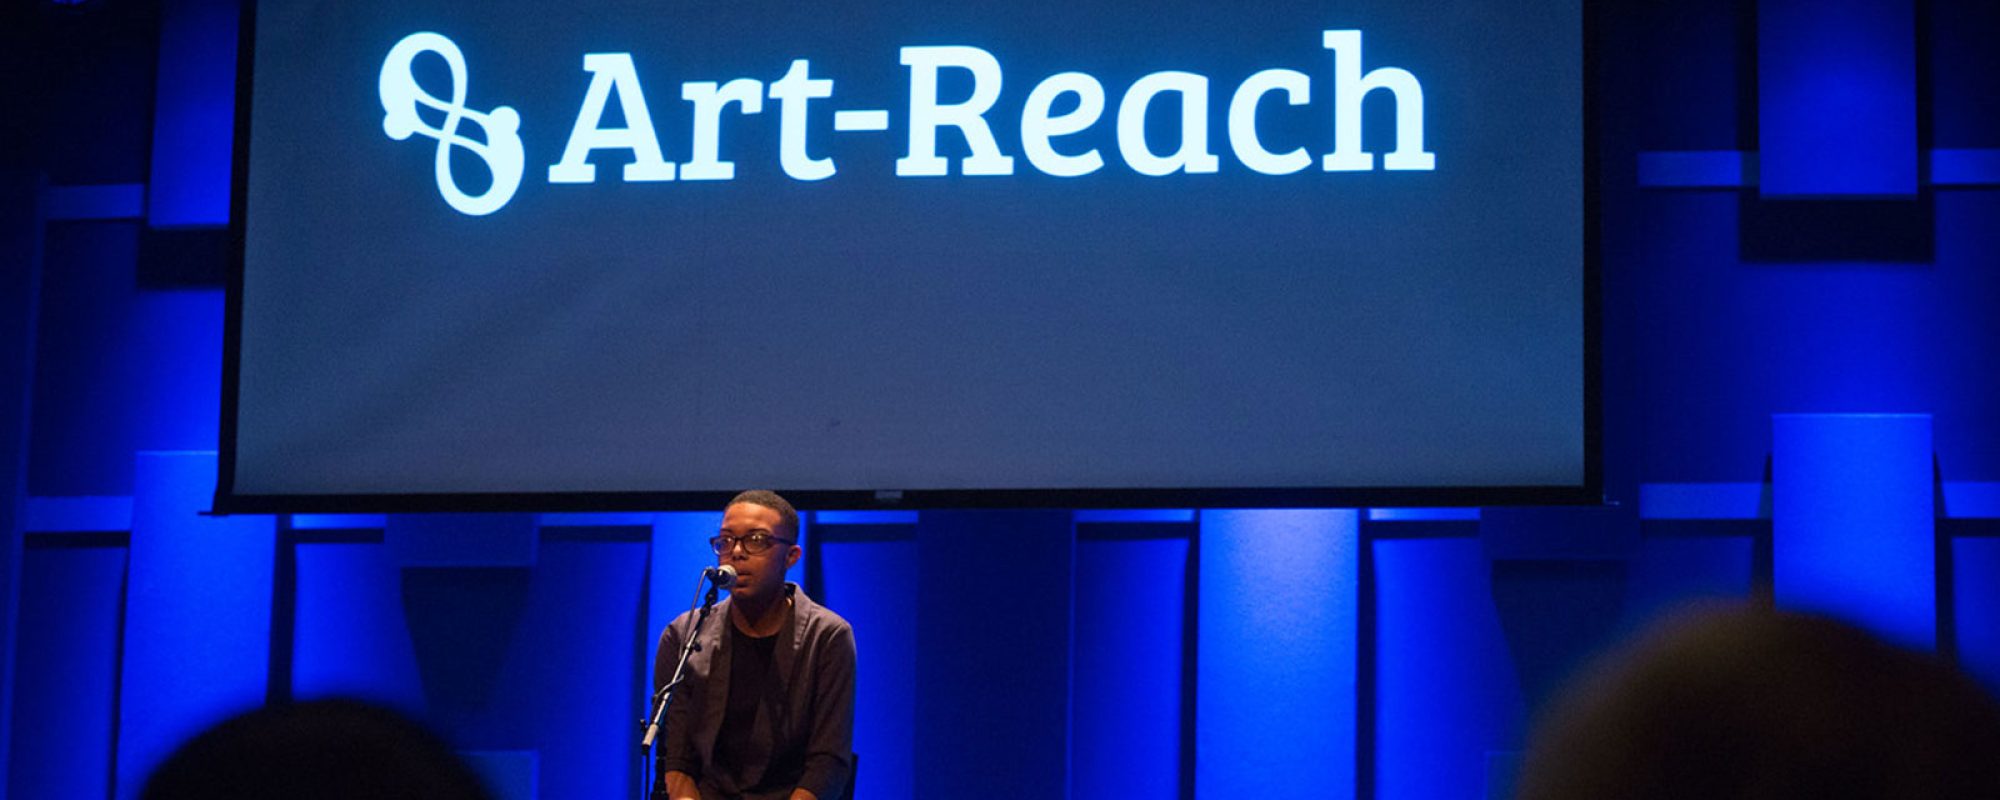 ART-REACH IN PHILADELPHIA RECEIVES STAND FOR THE ARTS AWARD FROM OVATION AND COMCAST